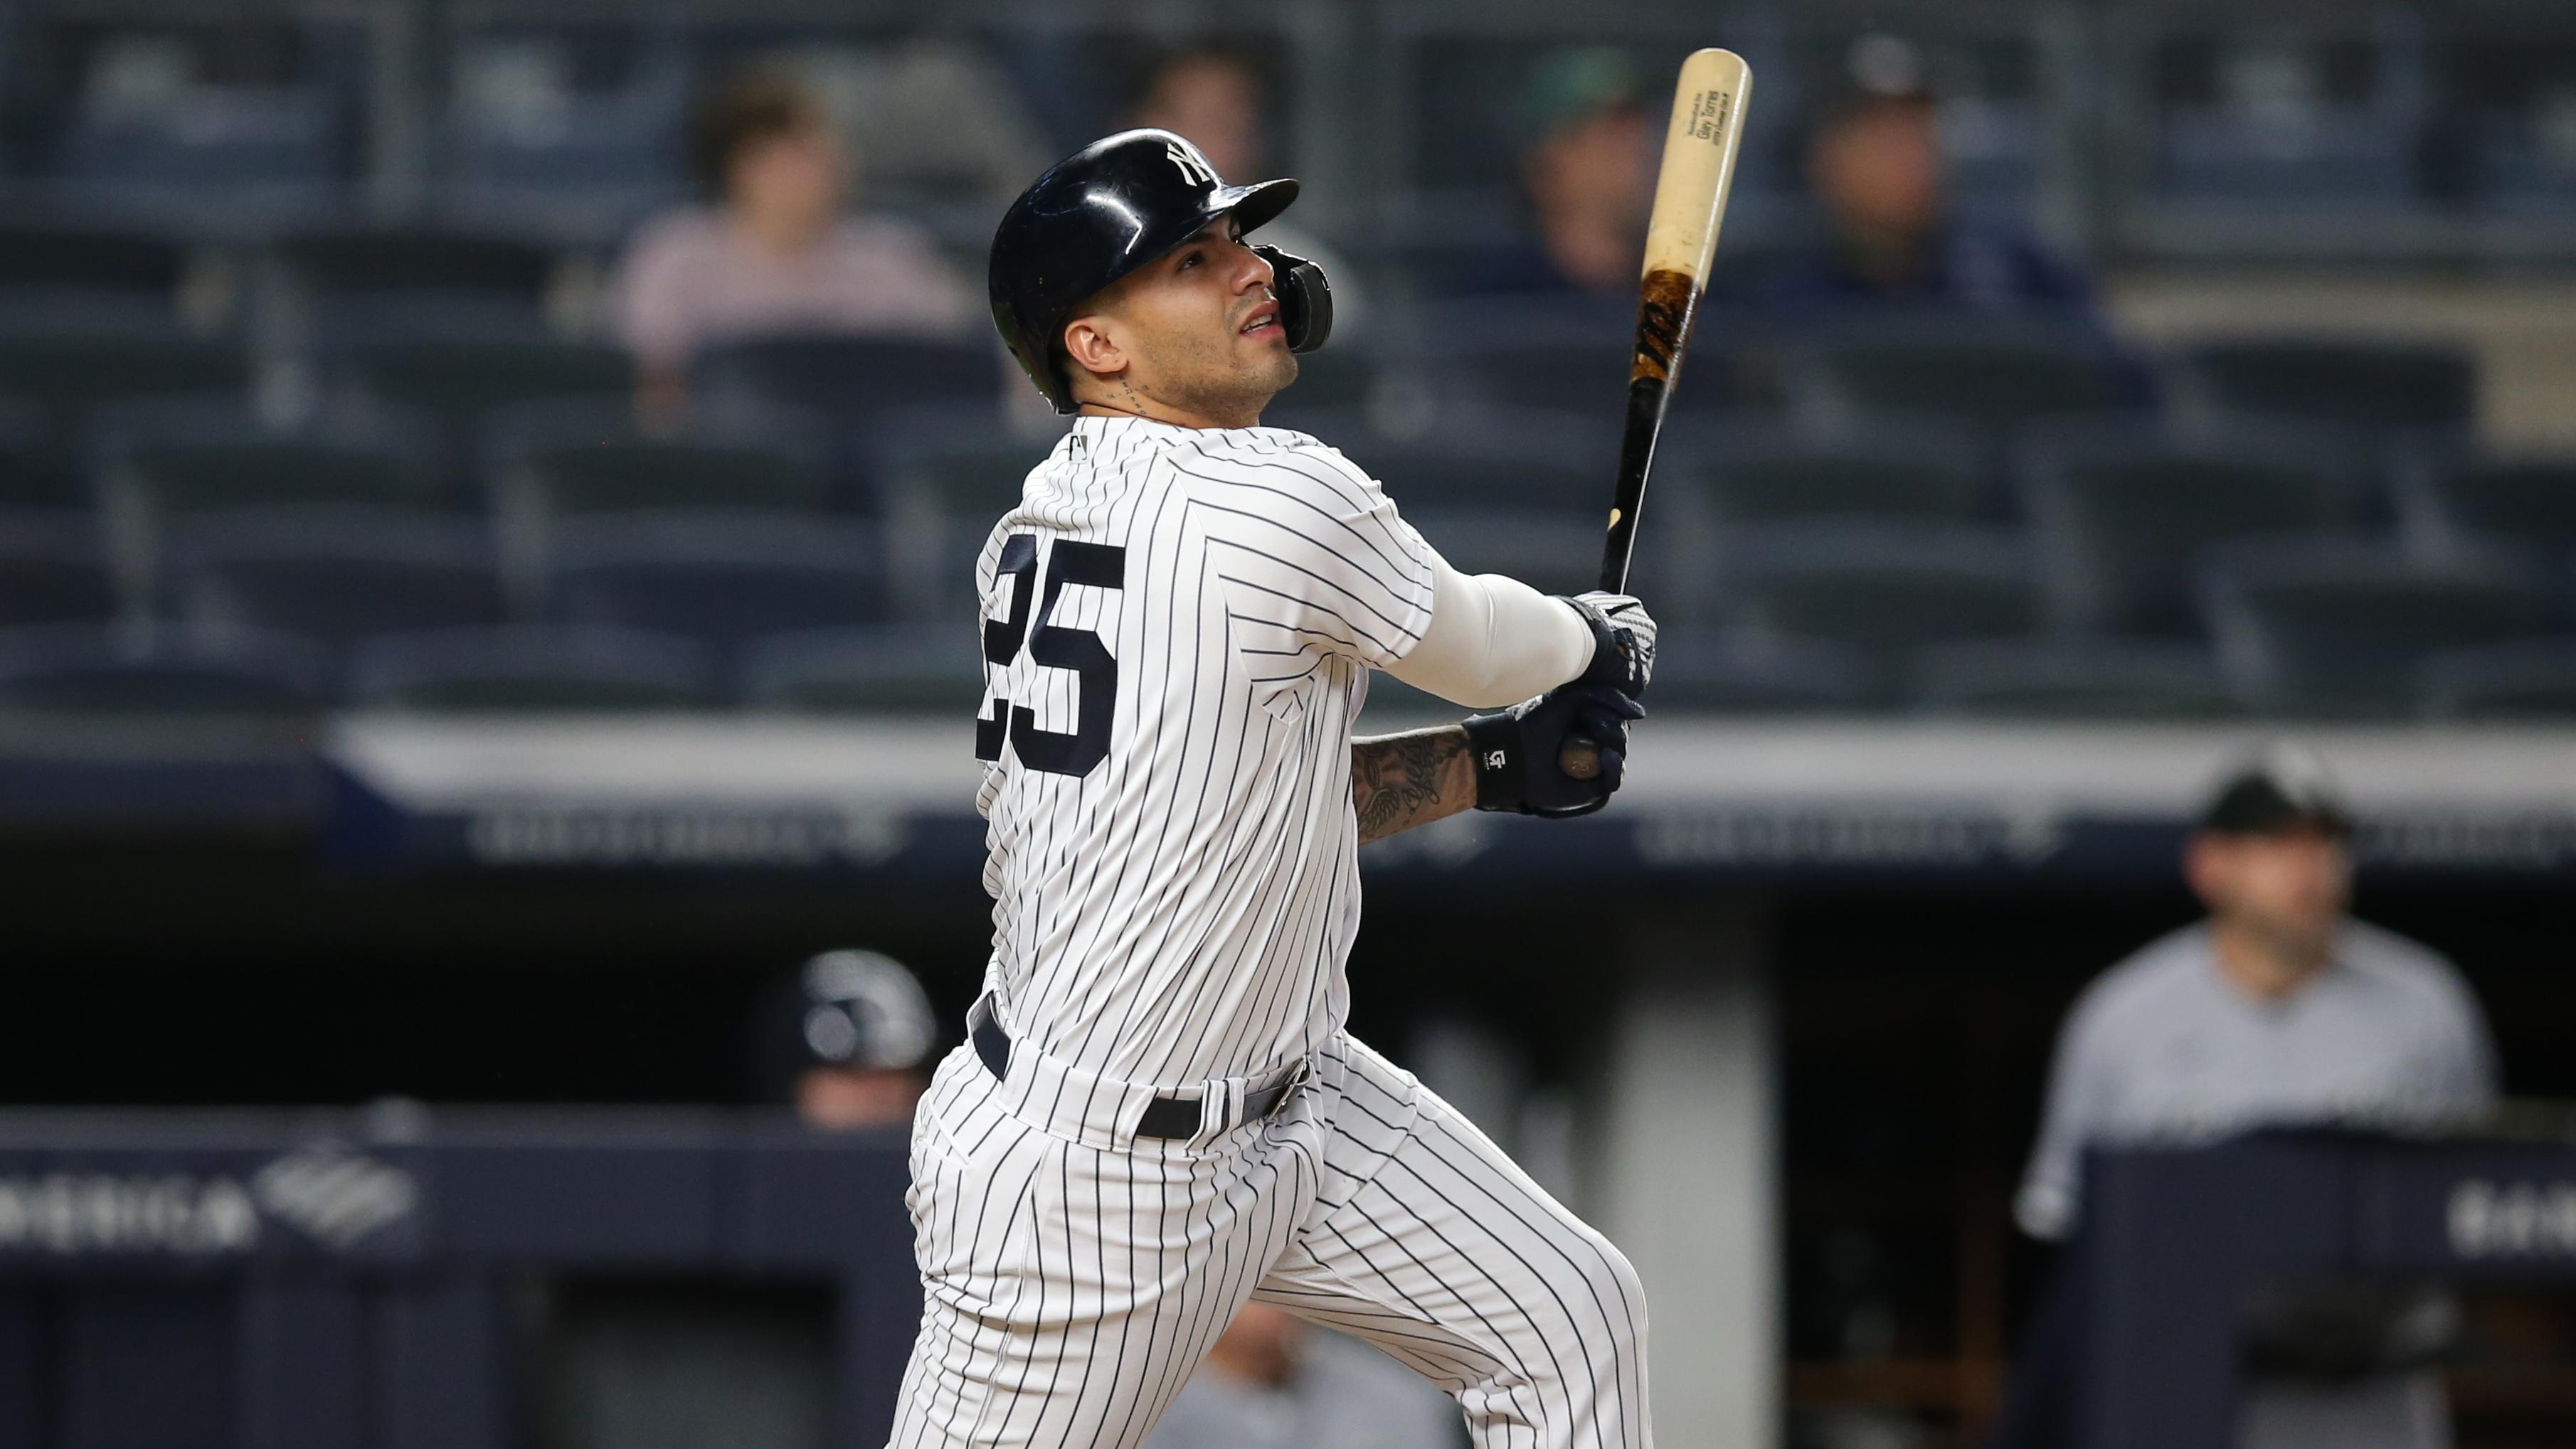 May 21, 2021; Bronx, New York, USA; New York Yankees shortstop Gleyber Torres (25) follows through on a solo home run against the Chicago White Sox during the seventh inning at Yankee Stadium. Mandatory Credit: Brad Penner-USA TODAY Sports / © Brad Penner-USA TODAY Sports